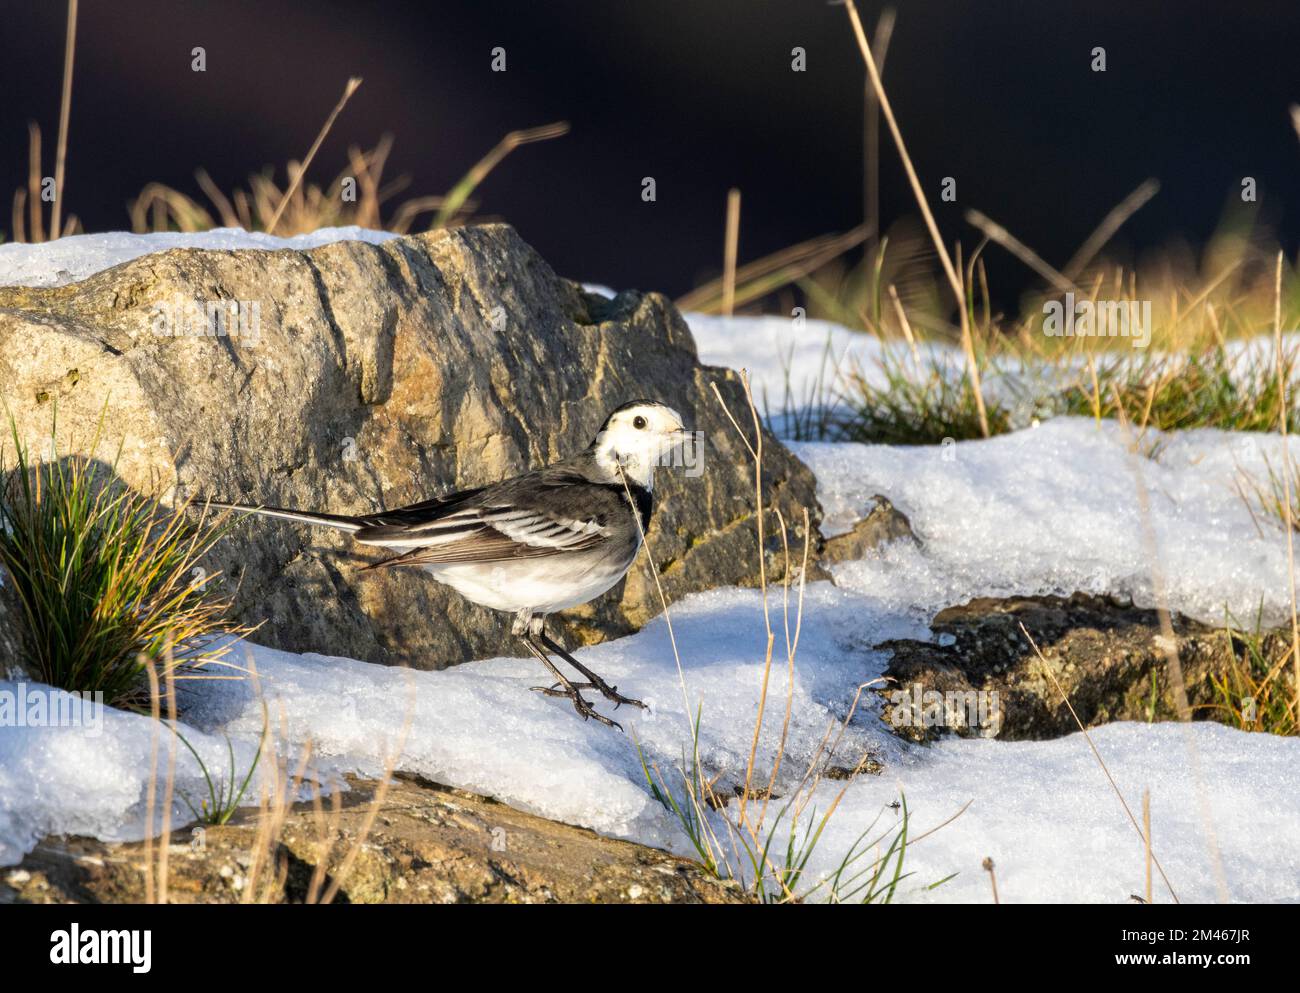 The Pied or White Wagtail is often found near water. They are active birds that constantly bob their tails as they walk in search of invertebrate food Stock Photo